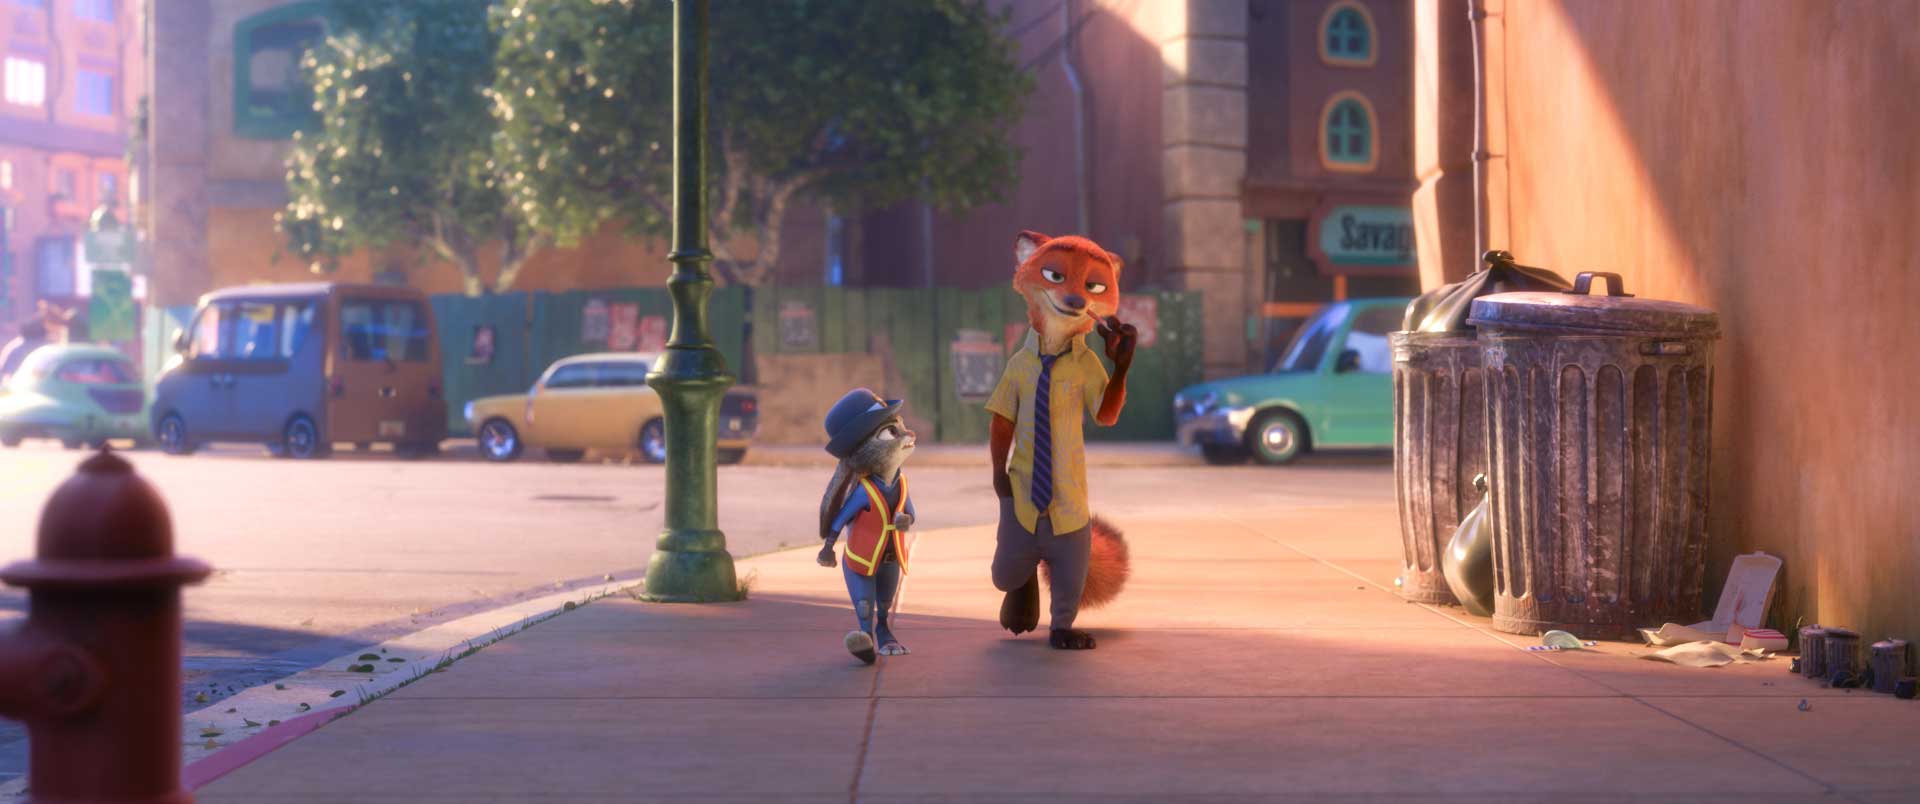 RELUCTANT PARTNER -- Fast-talking, con-artist fox Nick Wilde is not really interested in helping rookie officer Judy Hopps crack her first case.  Directed by Byron Howard and Rich Moore, and produced by Clark Spencer, Walt Disney Animation Studios' "Zootopia" opens in theaters on March 4, 2016. ©2016 Disney. All Rights Reserved.